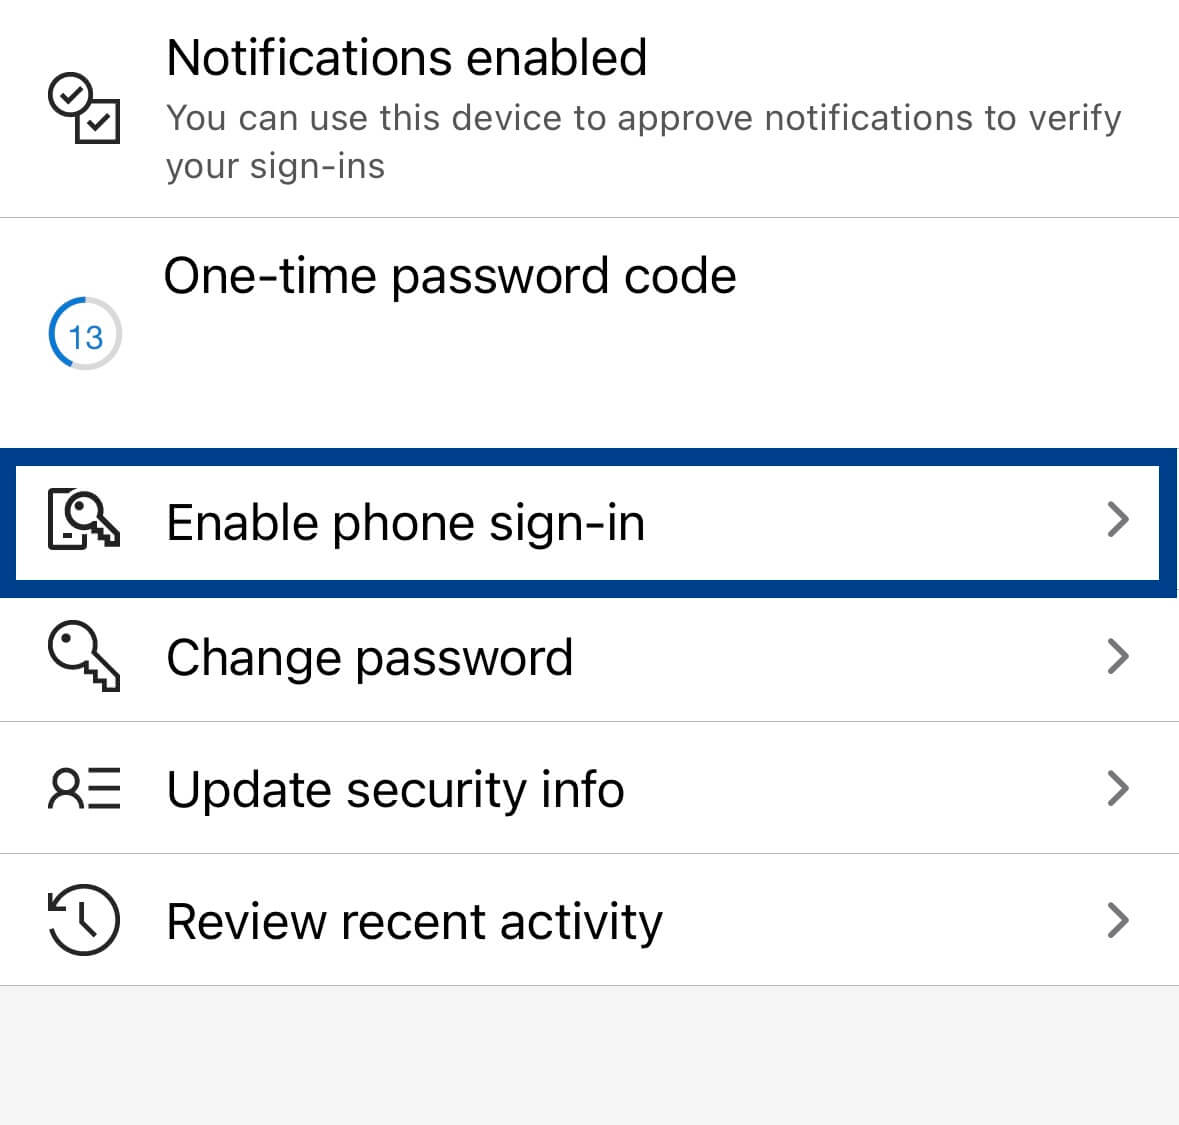 An authenticator account entry includes the enable phone sign-in option